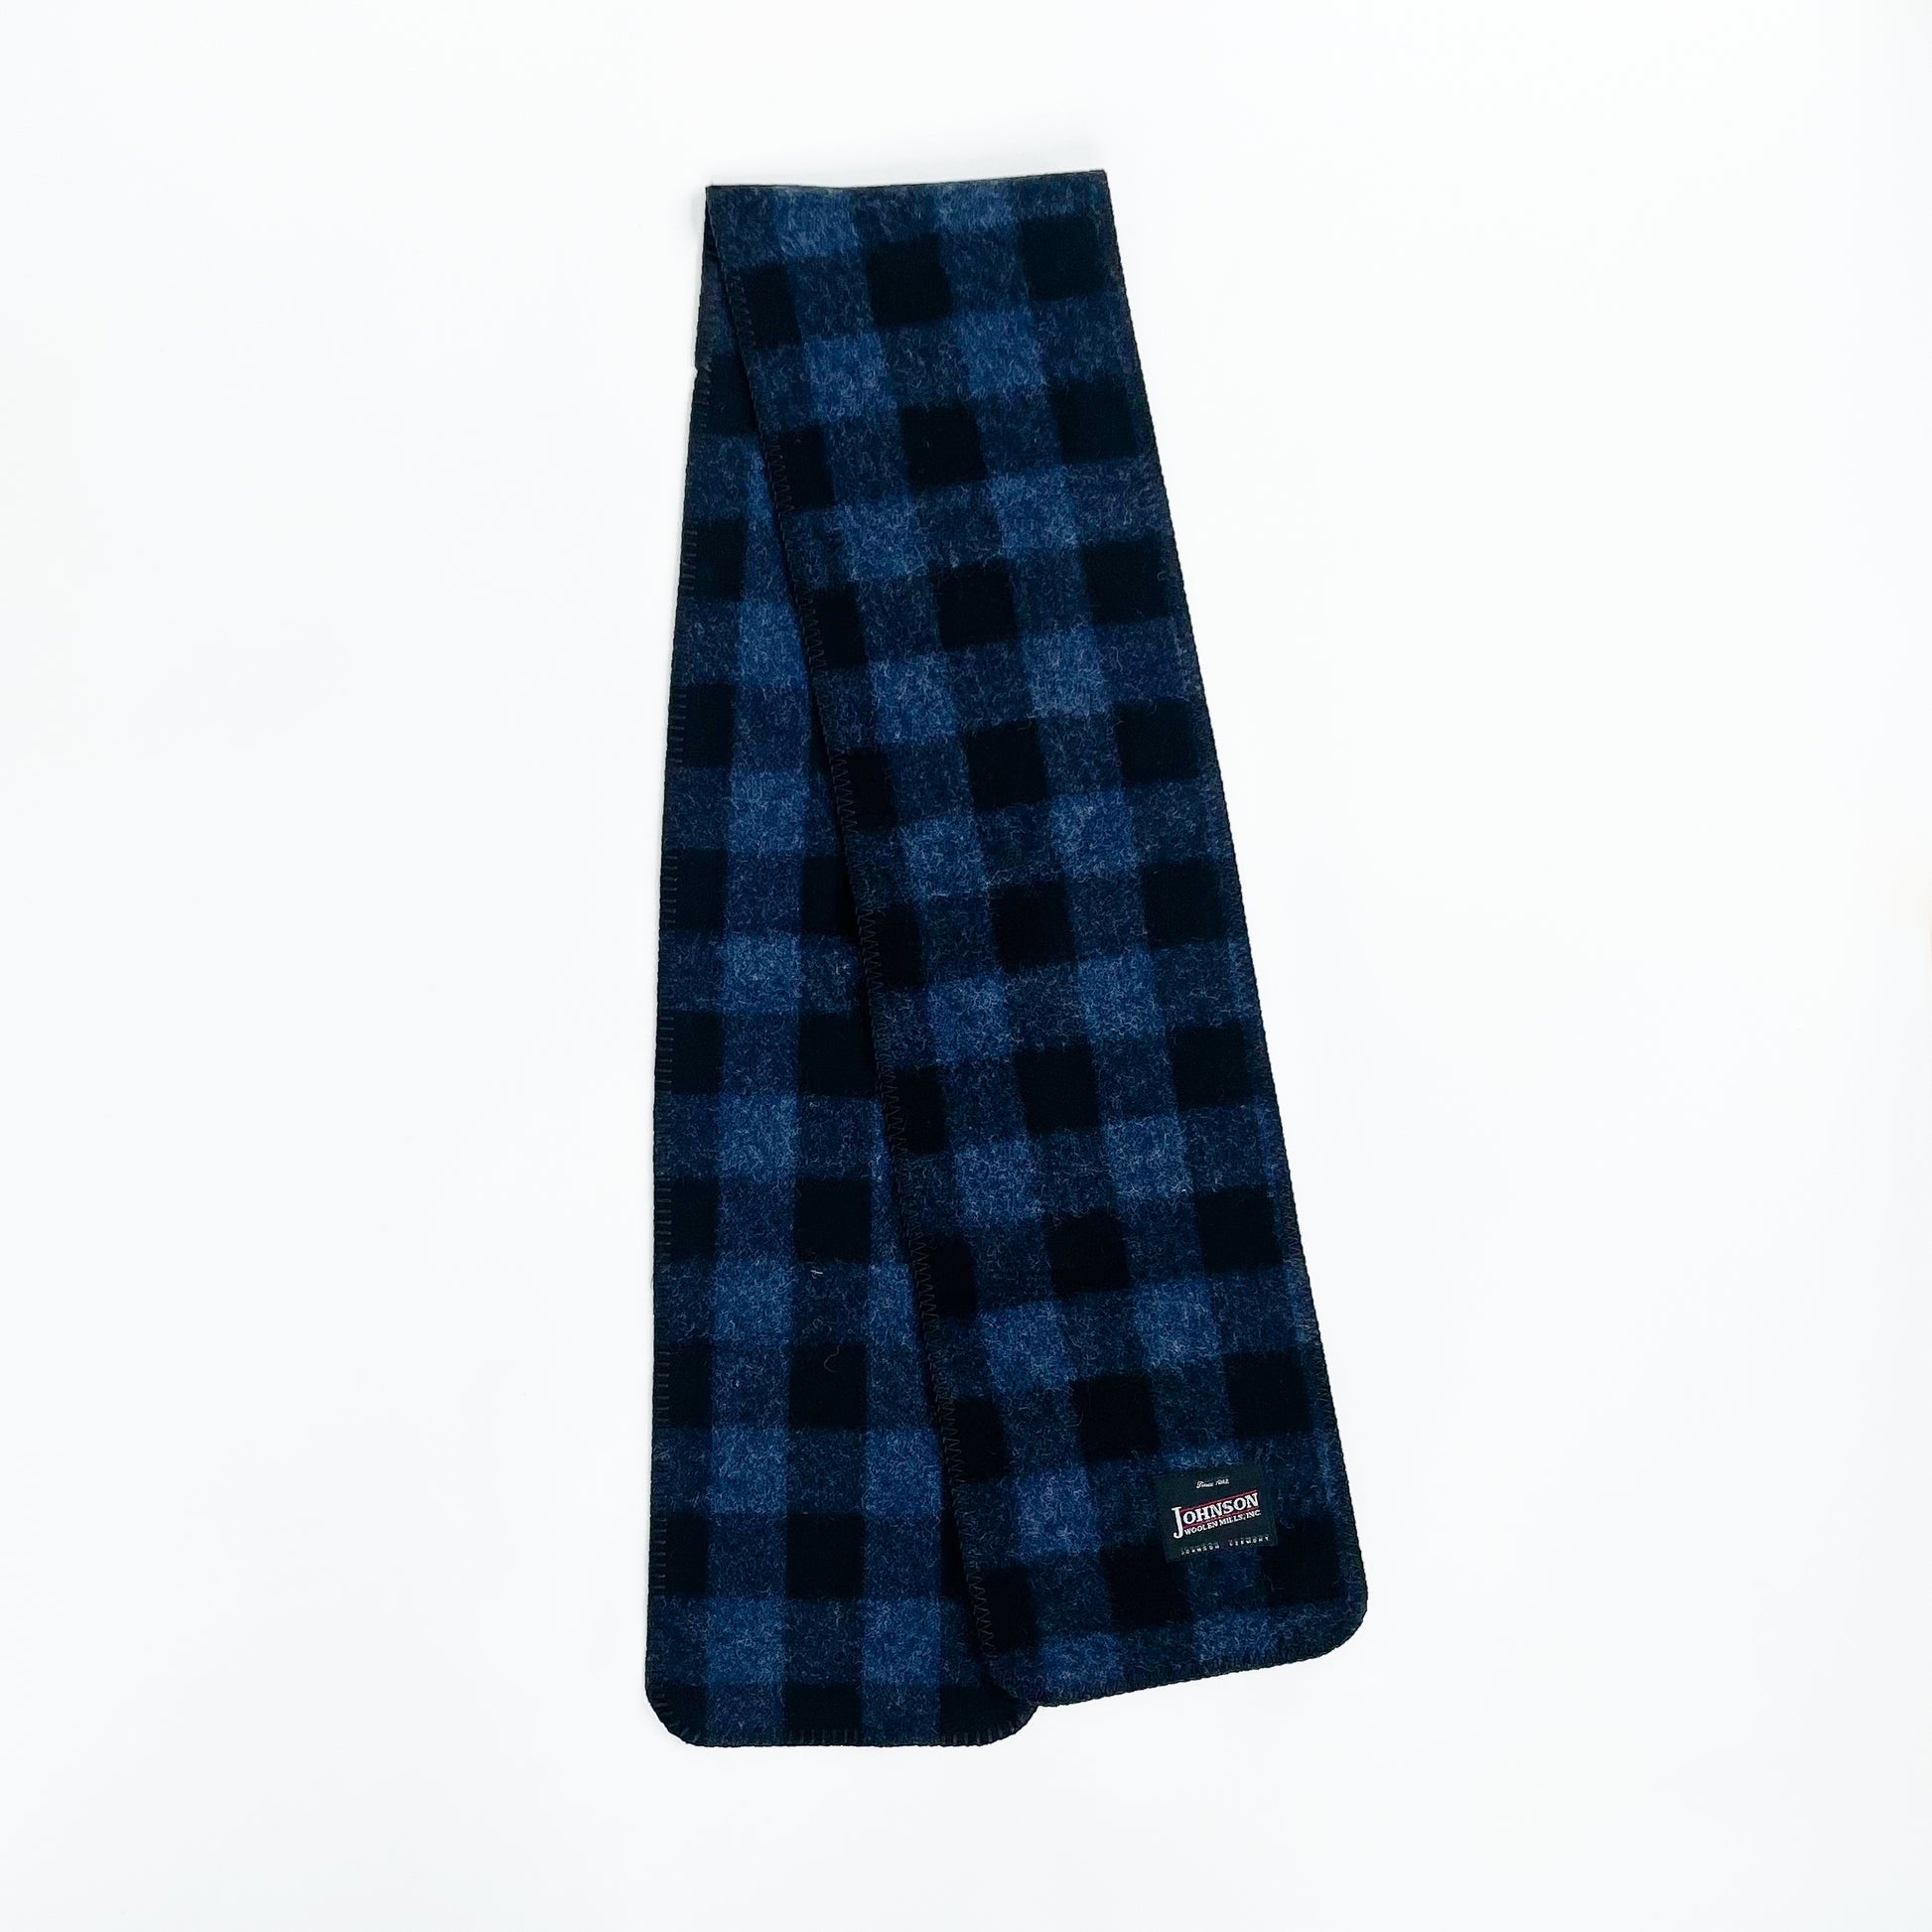 Scarf Wool Blue Denim blue/black check unfolded front view